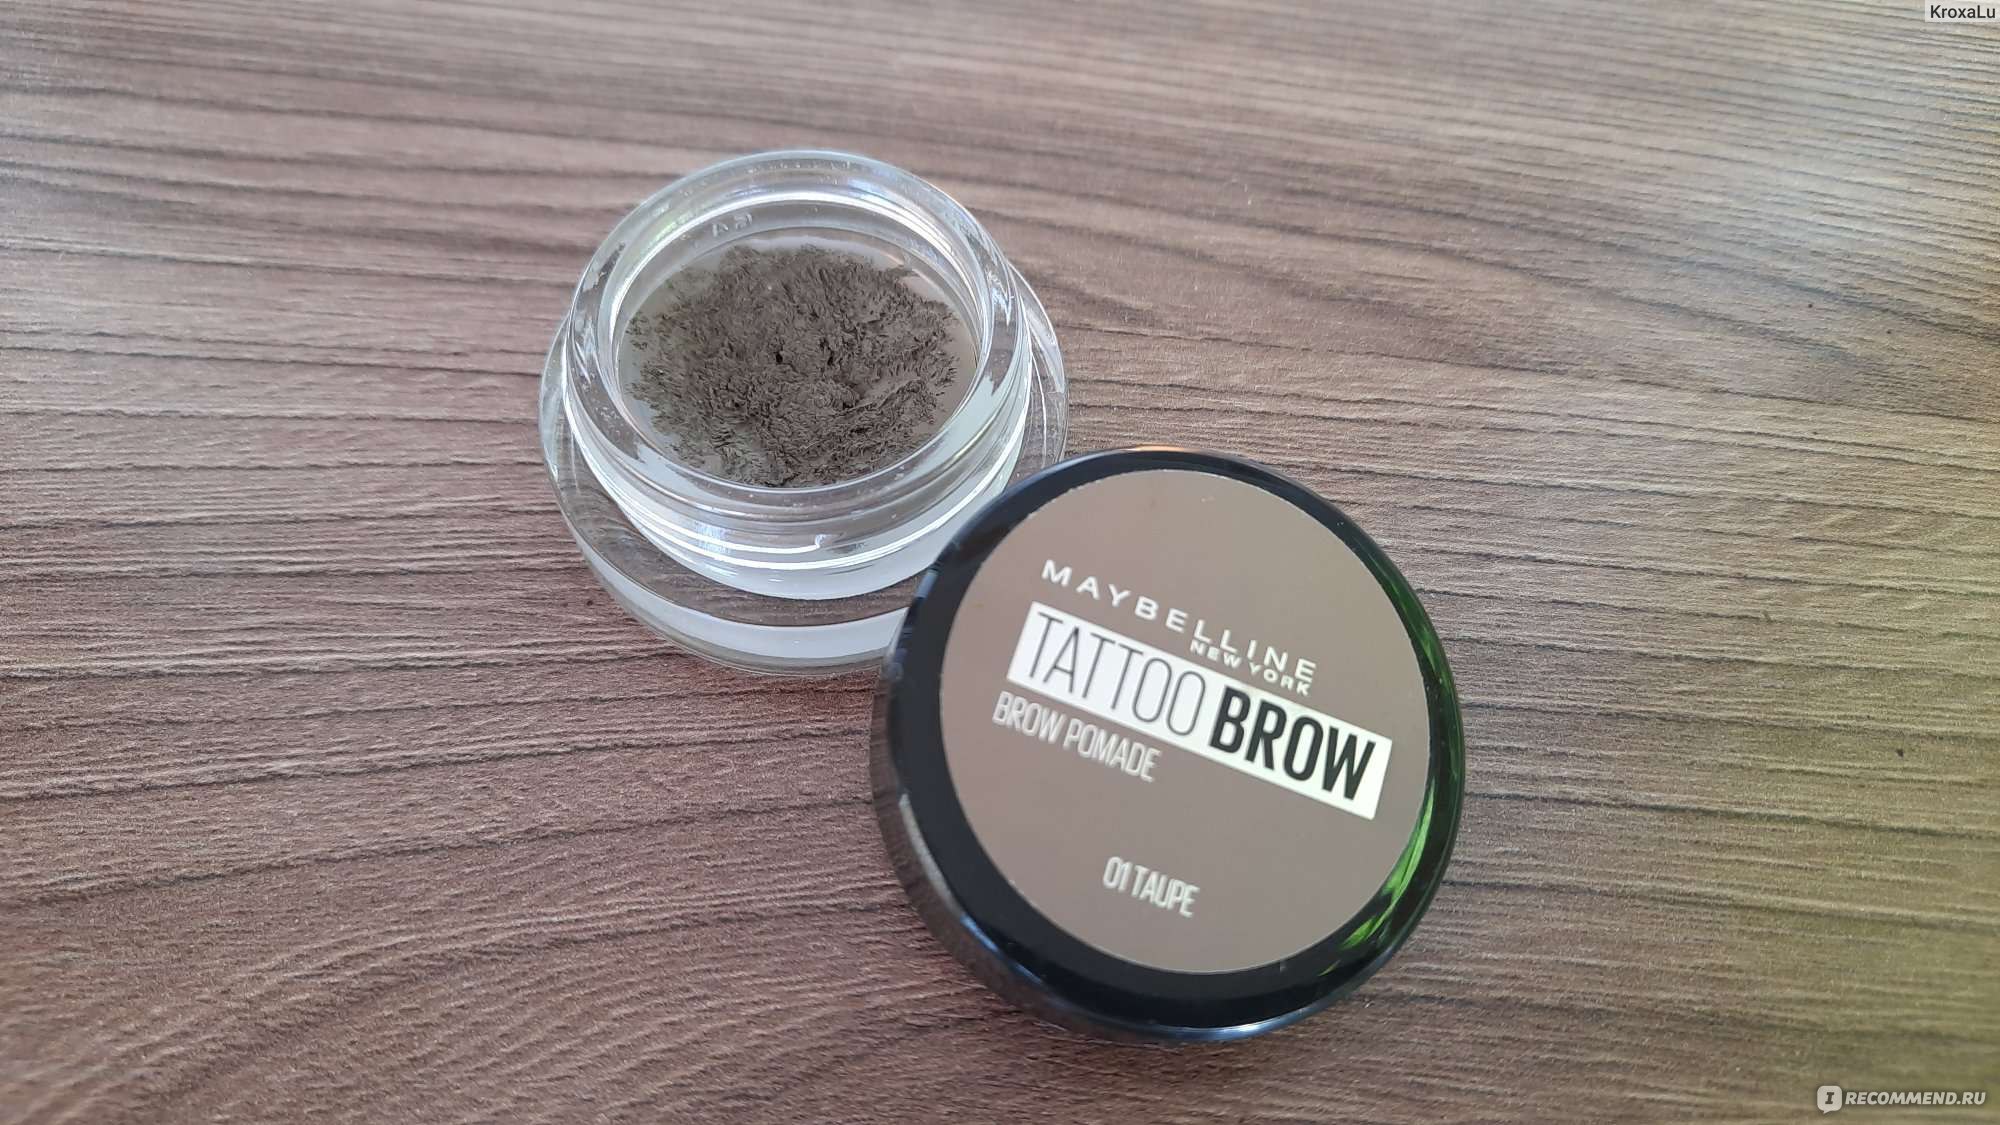 Maybelline Tattoo Brow Pomade 001 Taupe